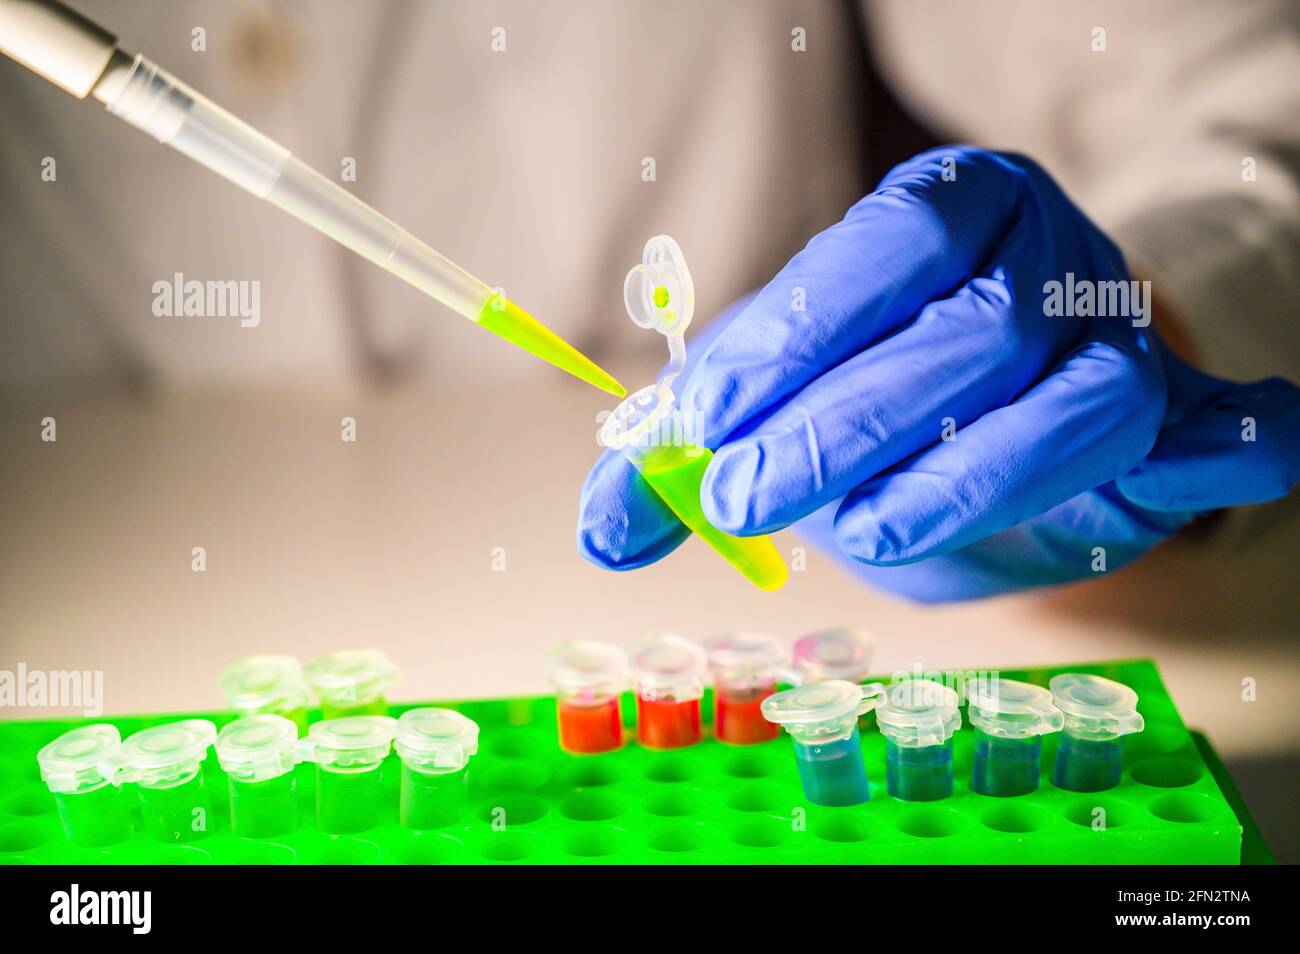 Scientist taking out green chemical solution from eppendorf tube on a white bench background for molecular biology research Stock Photo